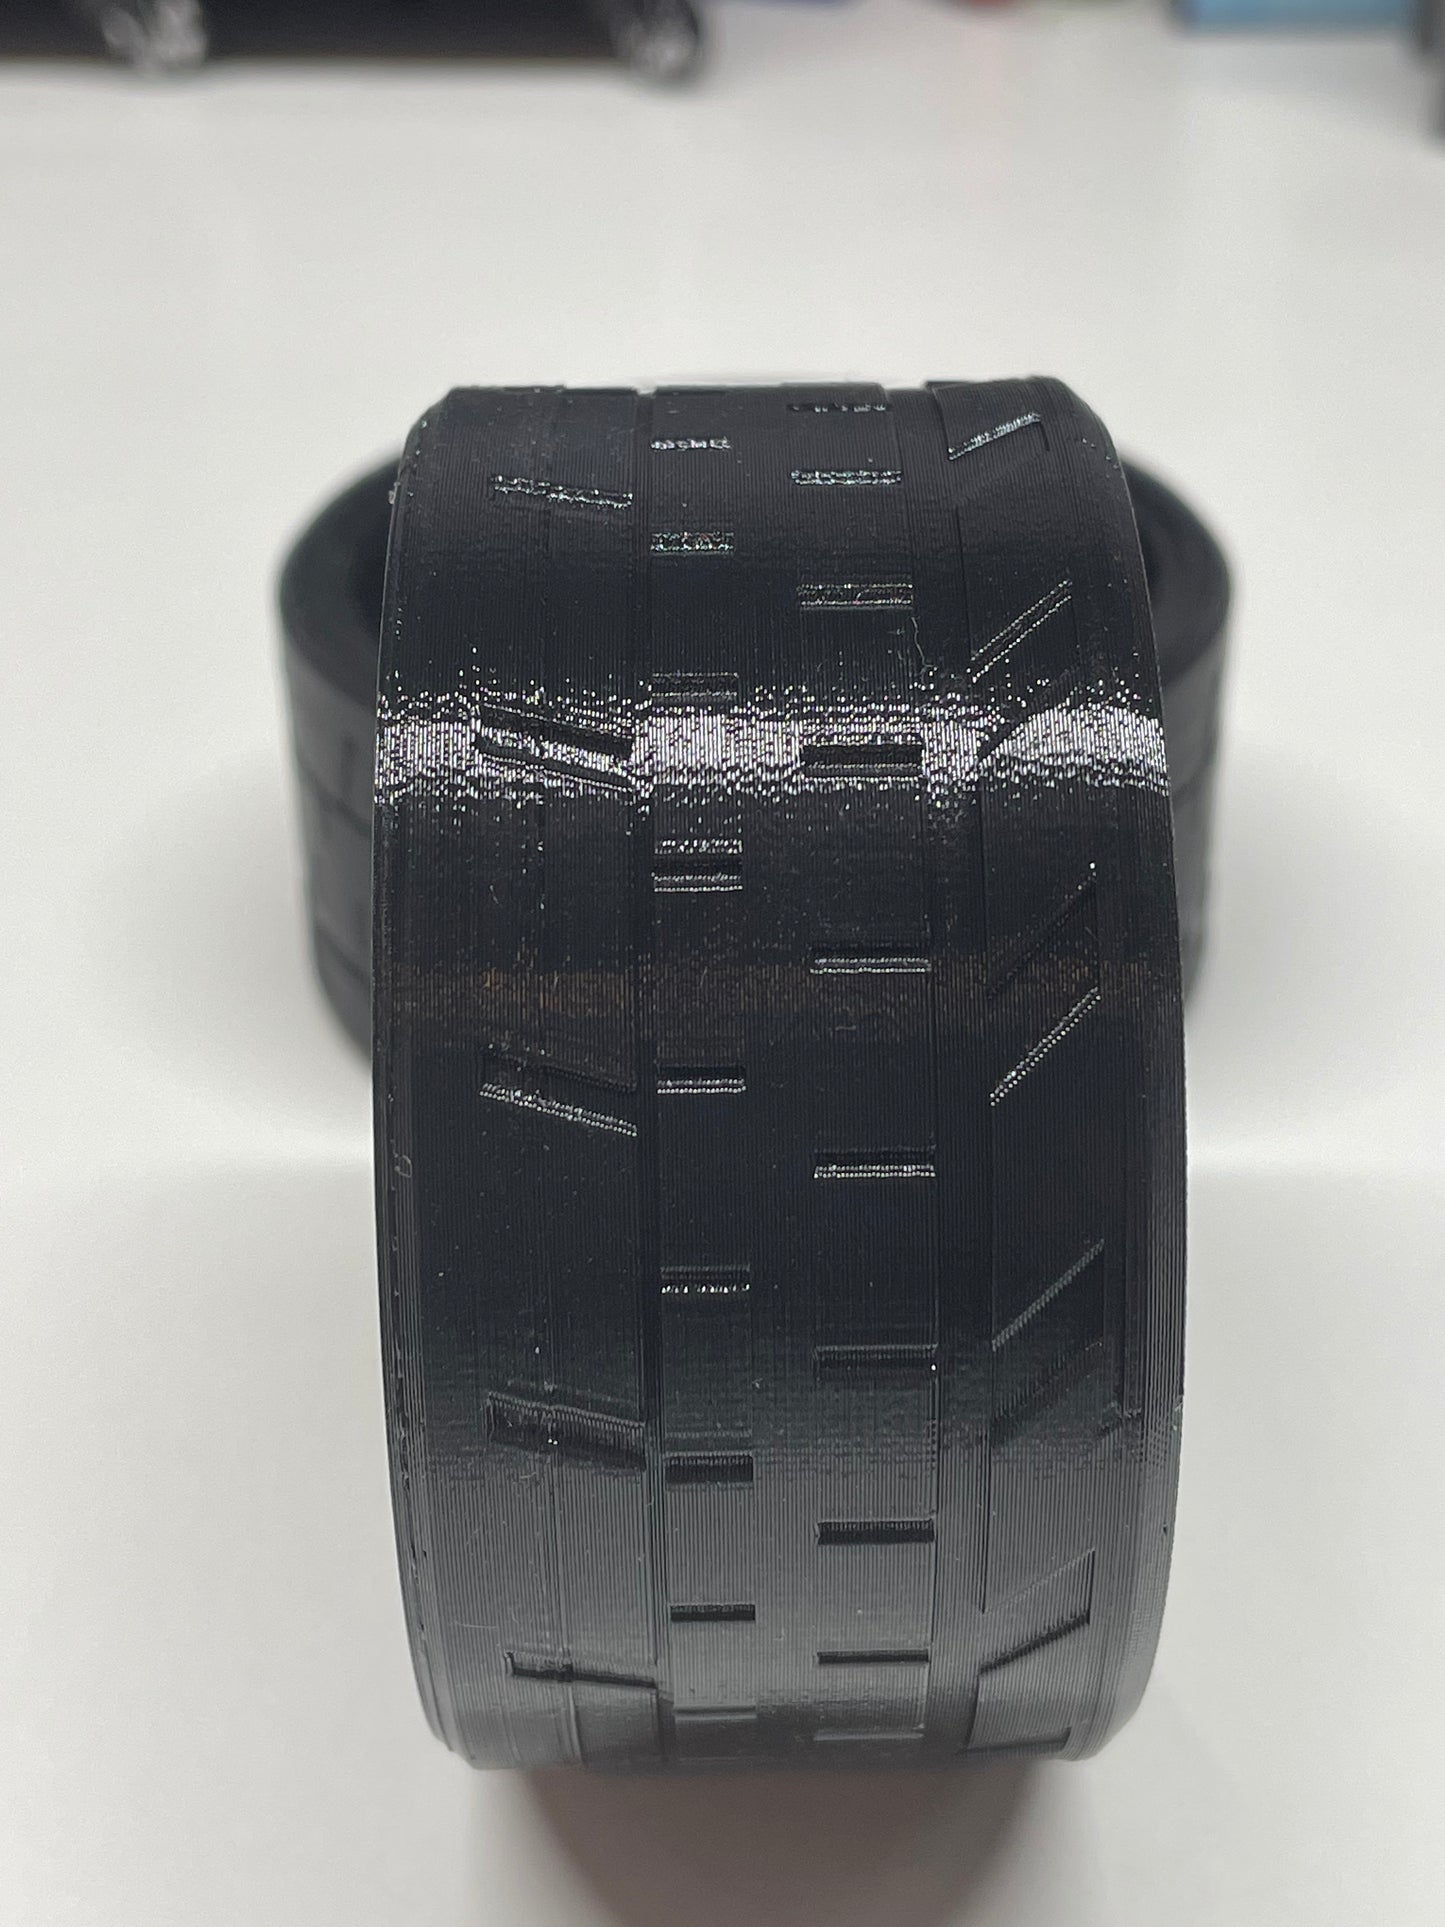 LoPro Tires for the CEN Racing American Force Wheel Size only. (Sold in sets of 6)